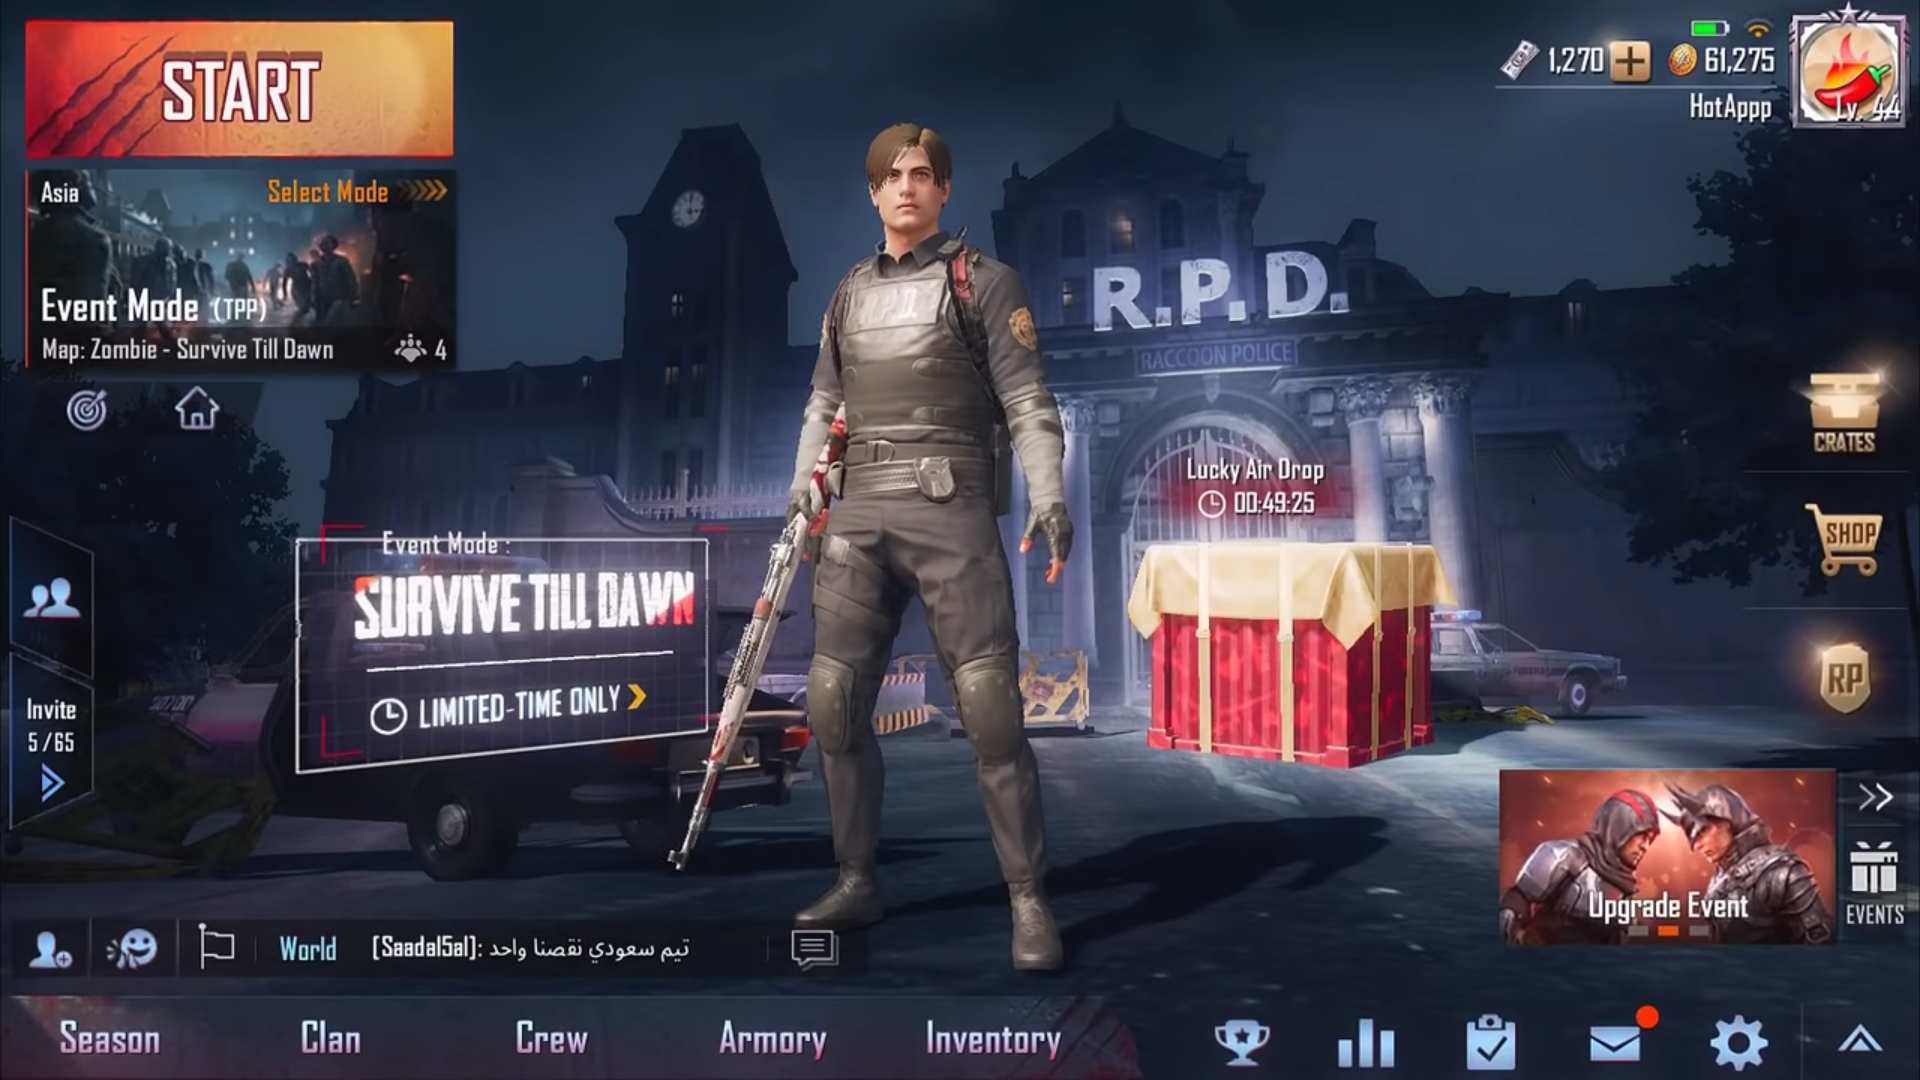 PUBG Mobile Update 0.11.0 is live with Resident Evil 2 ... - 1920 x 1080 png 1937kB